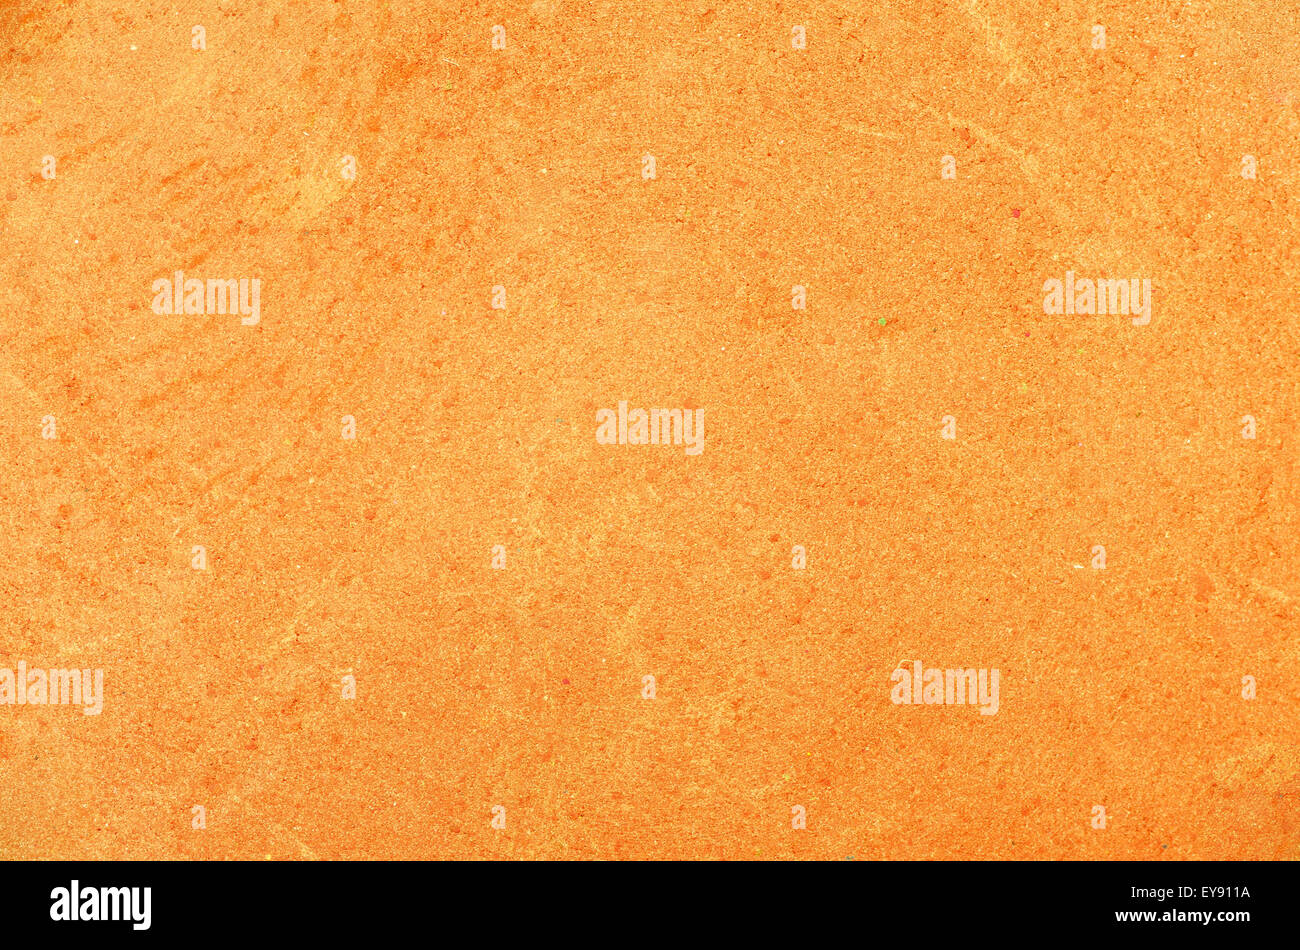 orange painted abstract background texture Stock Photo